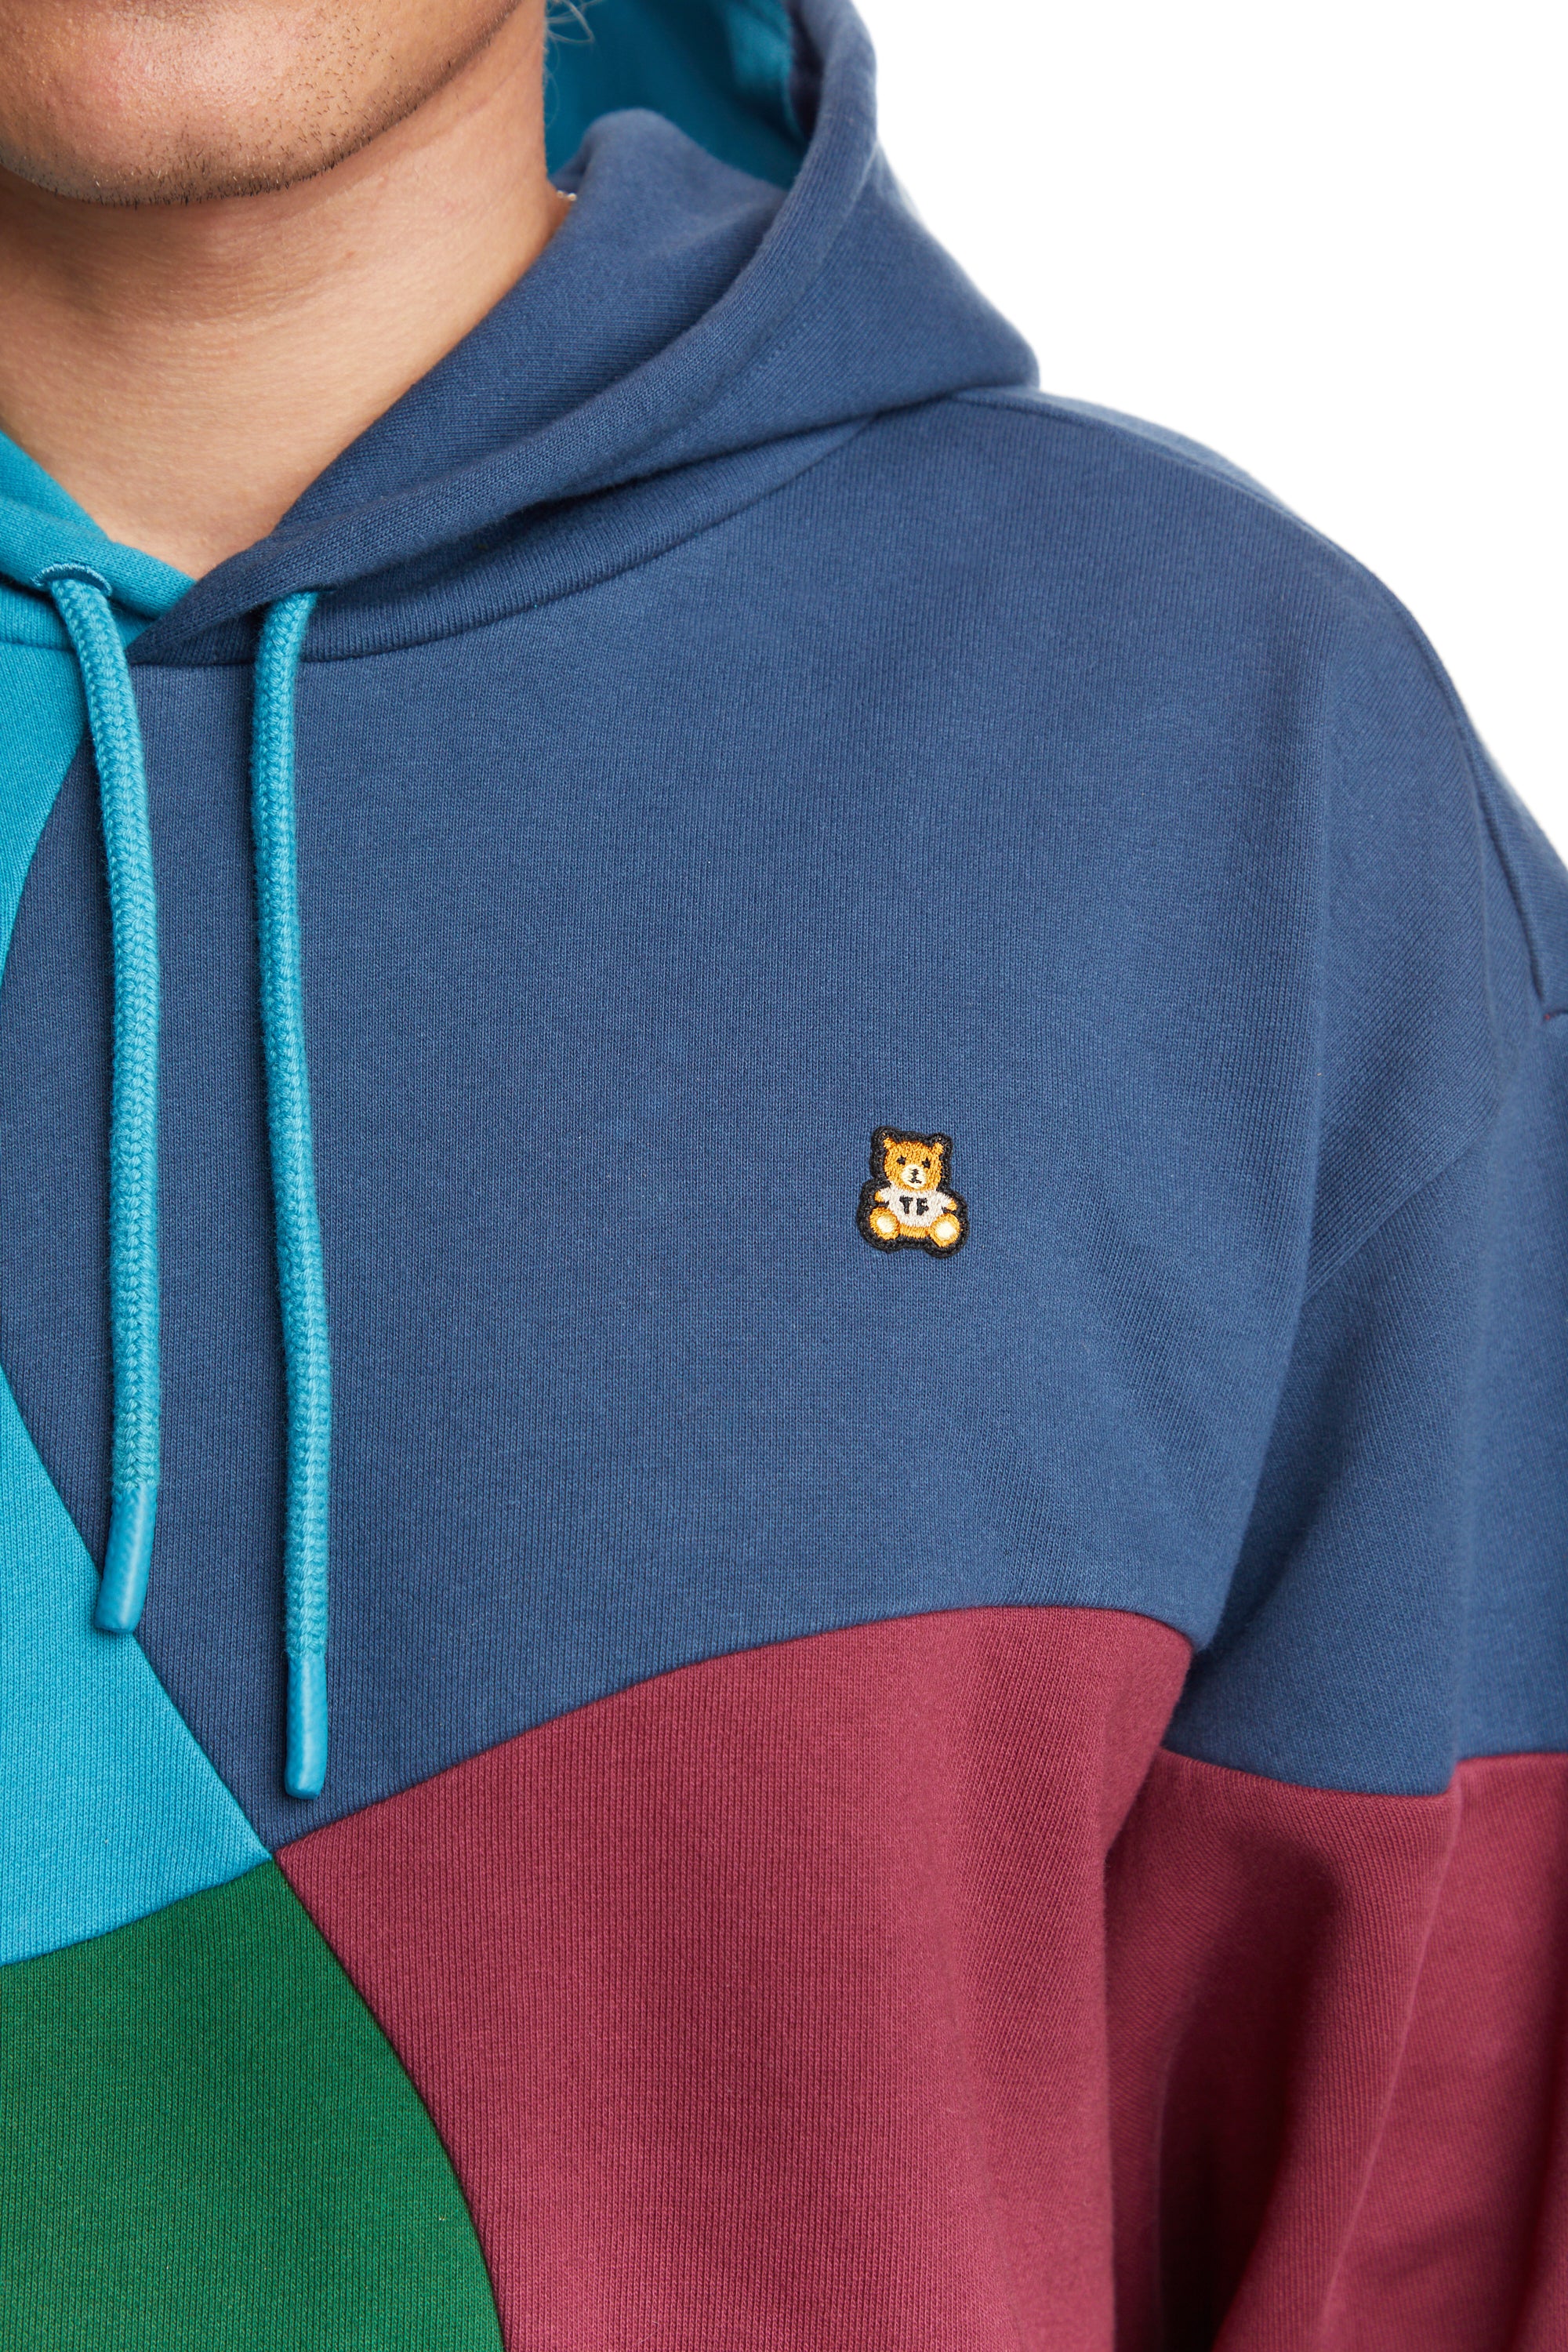 Teddy Fresh Patchwork Quilted Hoodie Sweatshirt  Urban Outfitters Japan -  Clothing, Music, Home & Accessories